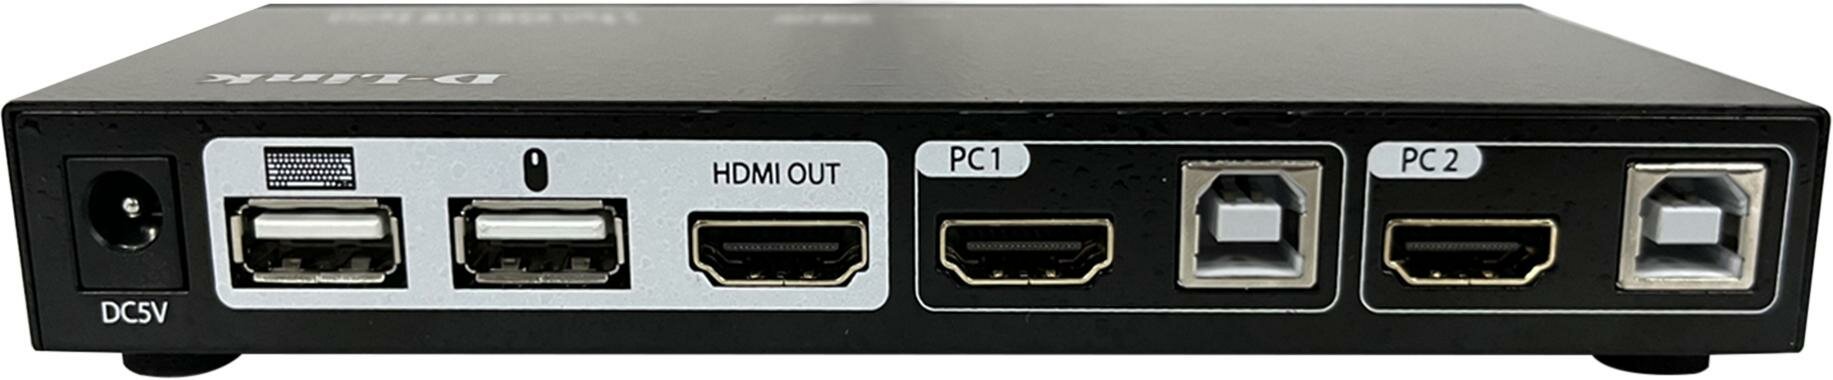 2-port KVM Switch with HDMI and USB portsControl 2 computers from a single keyboard monitor mouse Supports video resolutions up to 4096 x 2160 Sw